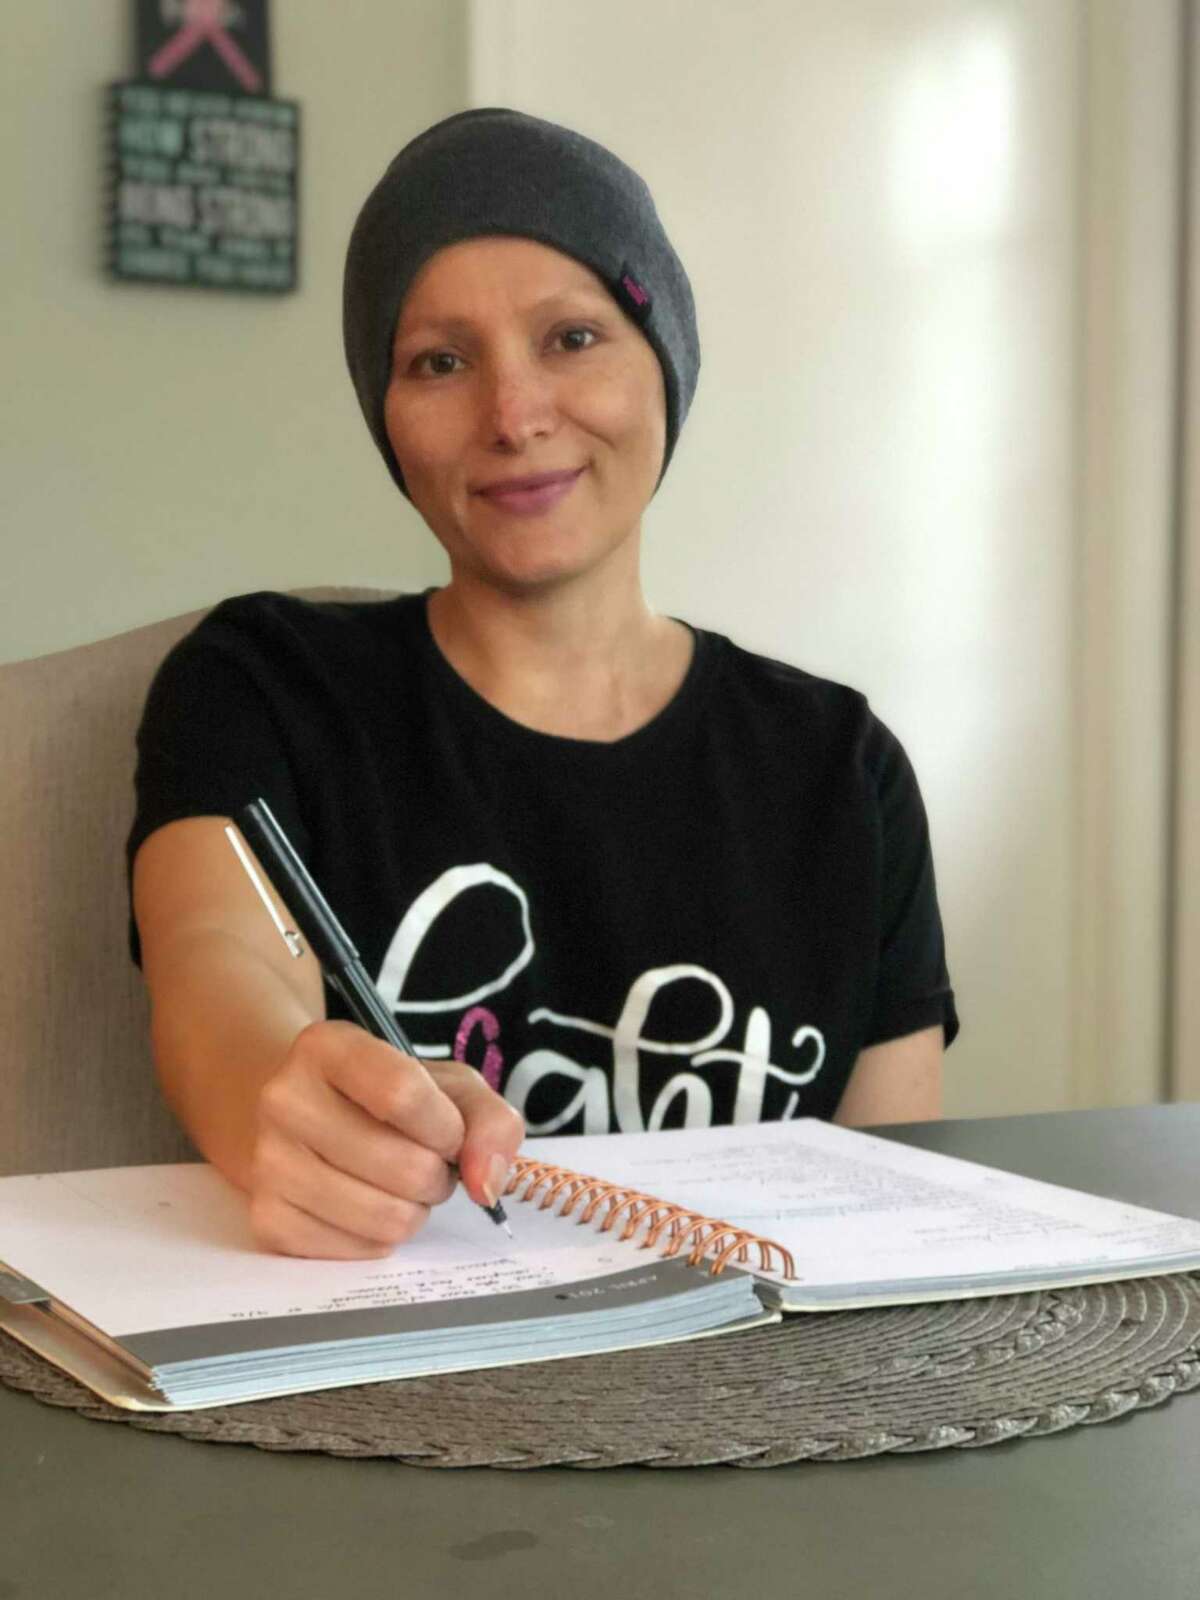 Monica Iparrea was just starting to feel ‘almost normal’ when the threat of the novel coronavirus took hold. Diagnosed with breast cancer in late 2019, the pandemic was another complication in her recovery process.